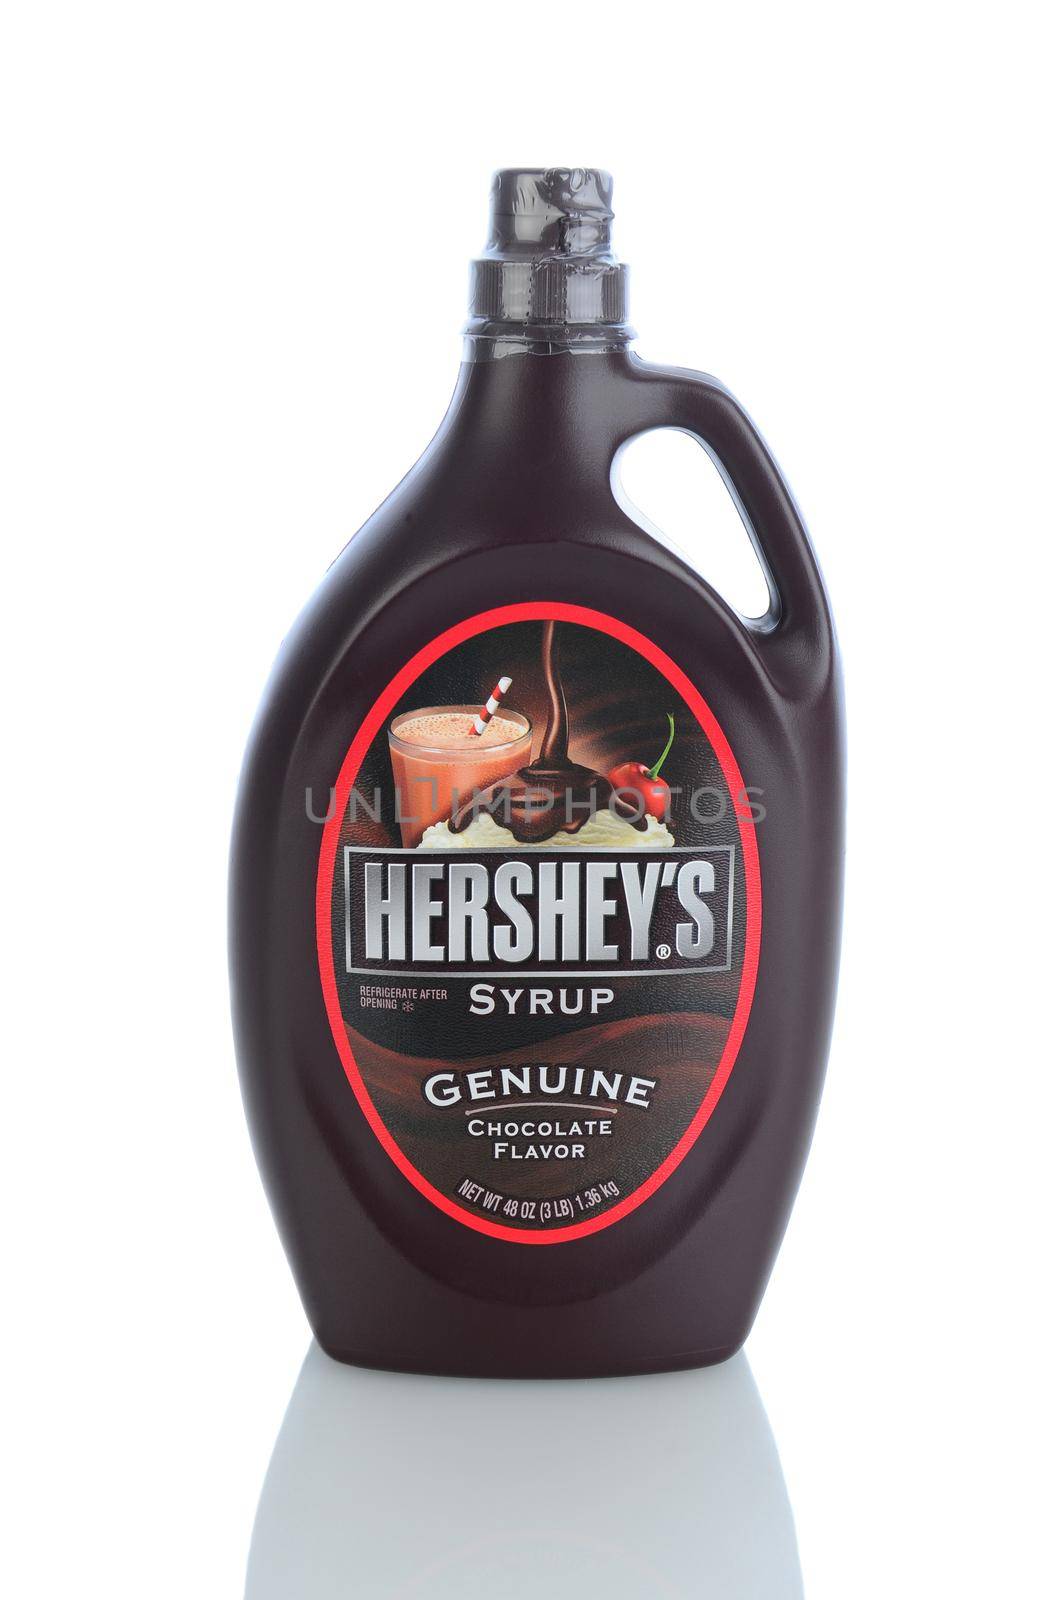 IRVINE, CA - January 11, 2013: A 48 ounce bottle of Hersheys Chocolate Syrup. The Hershey Company is the largest chocolate manufacturer in North America.